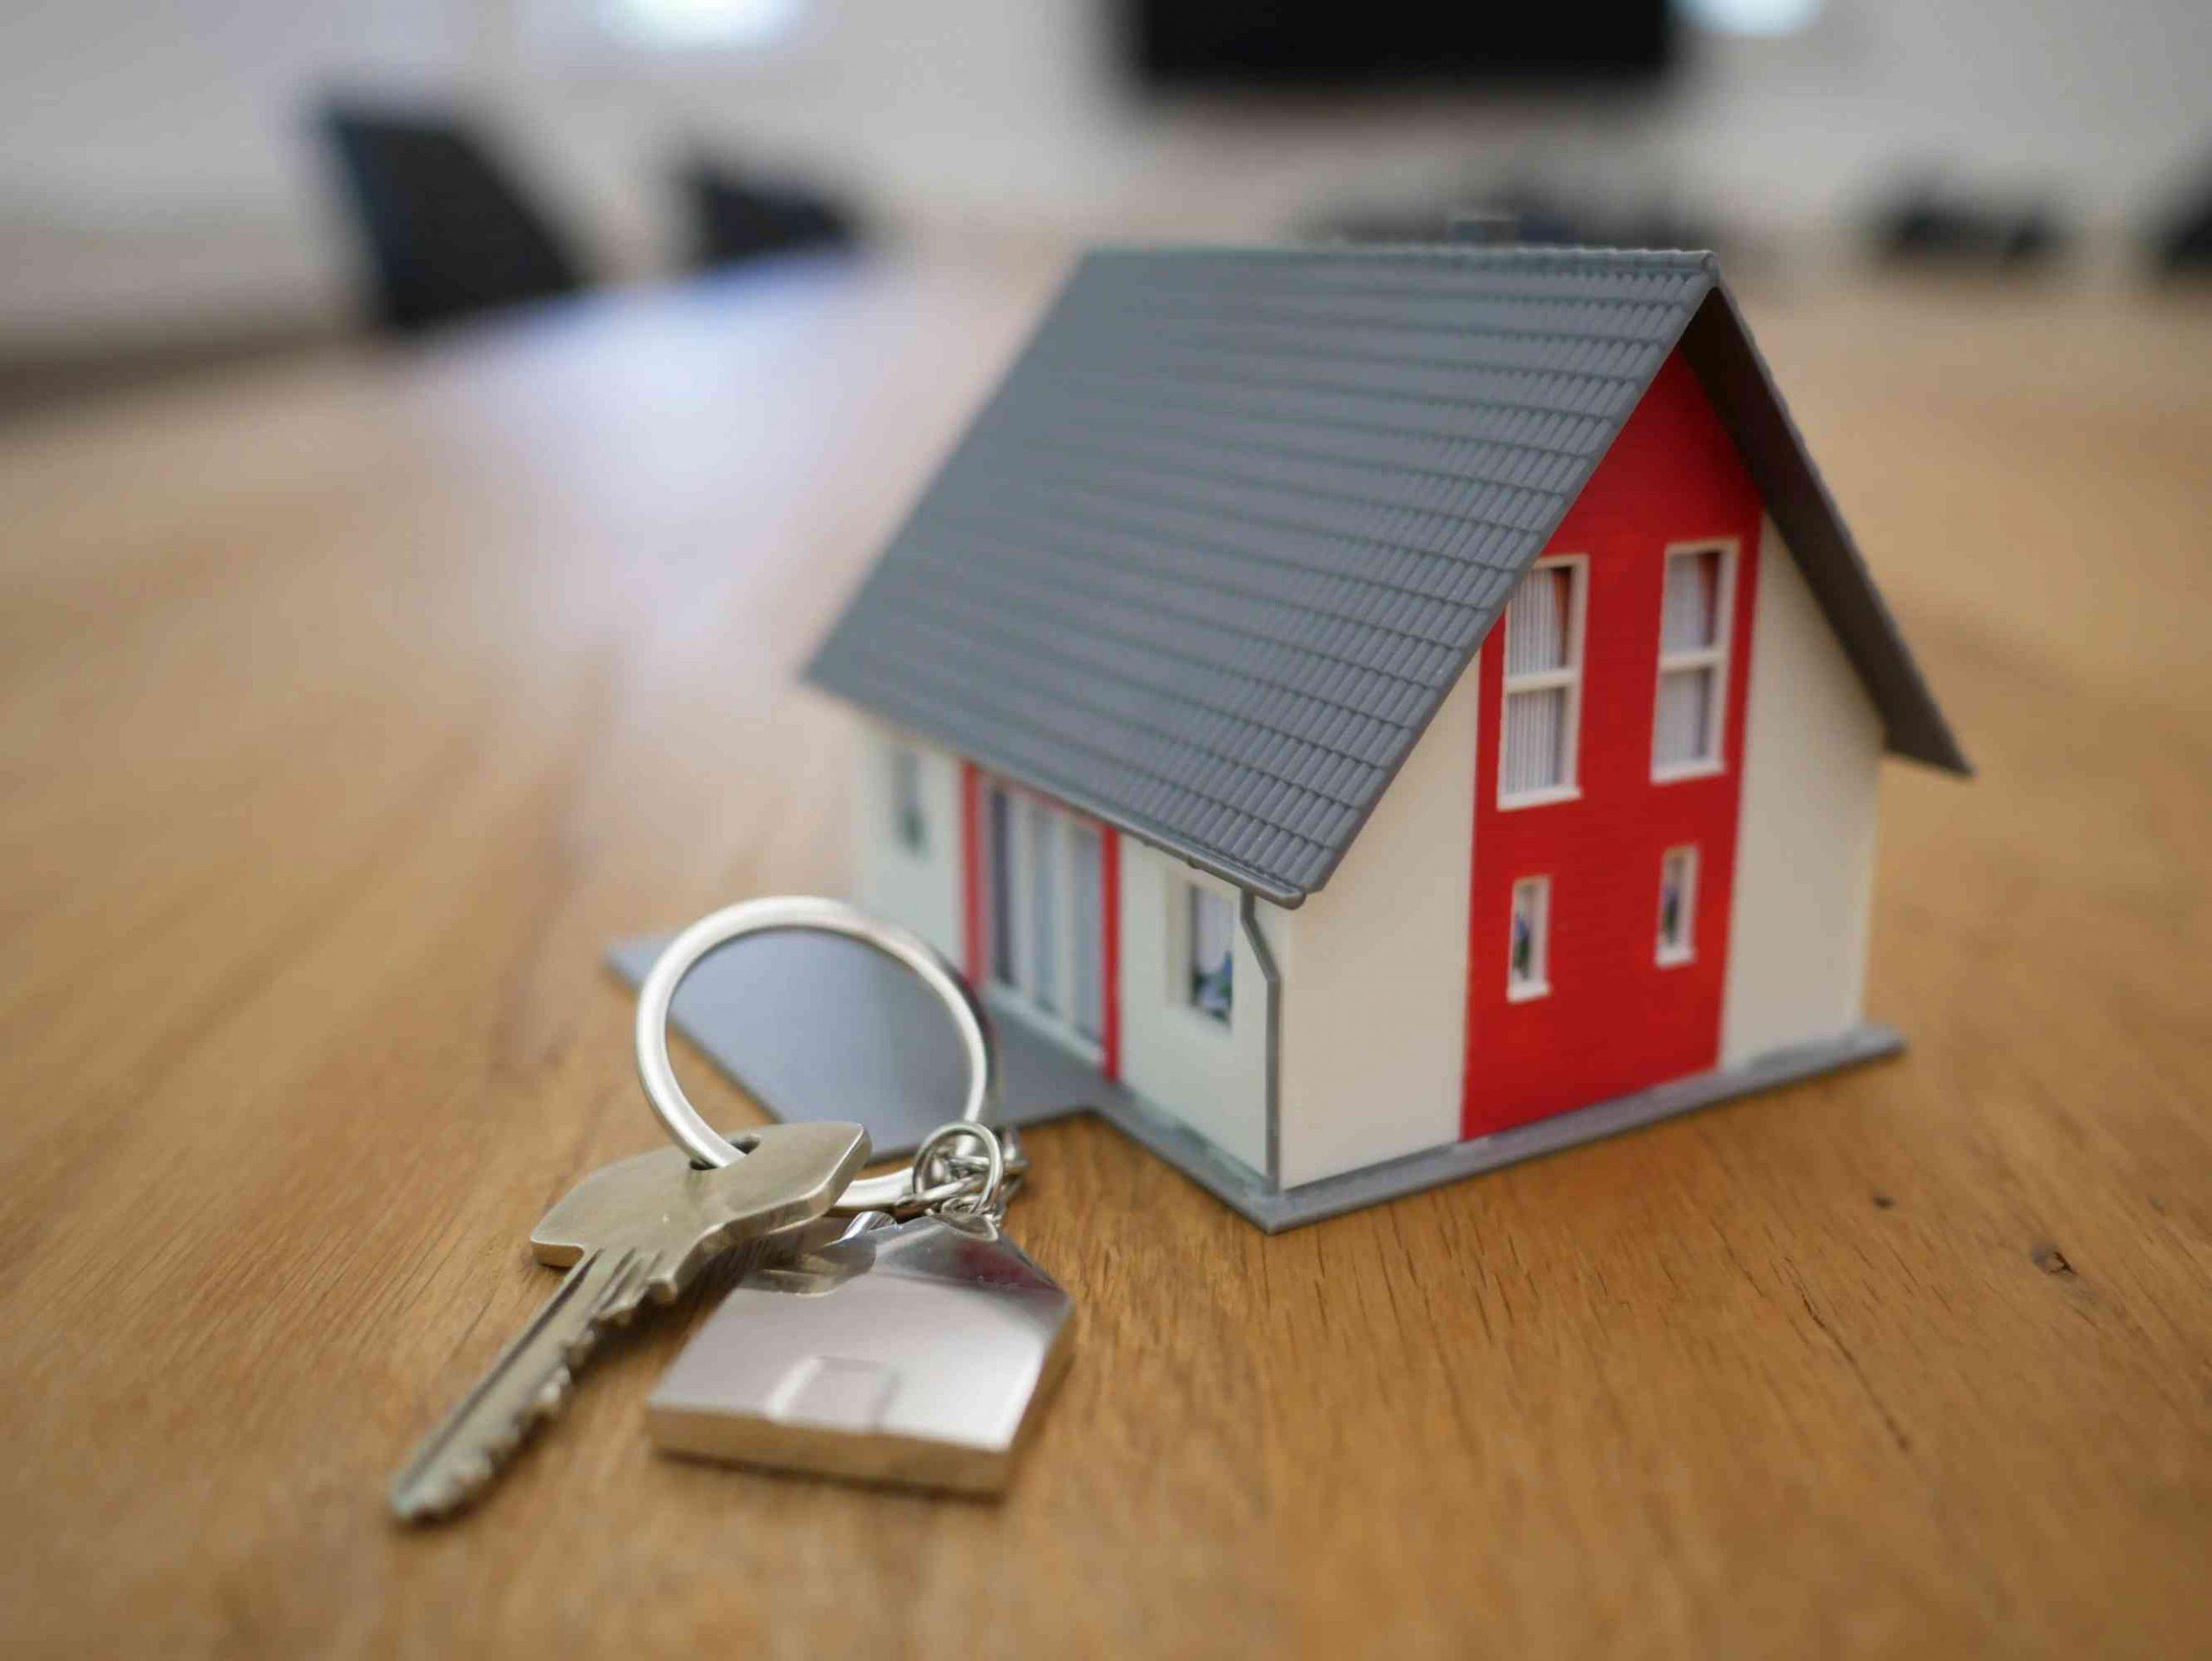 things to know before buying a house